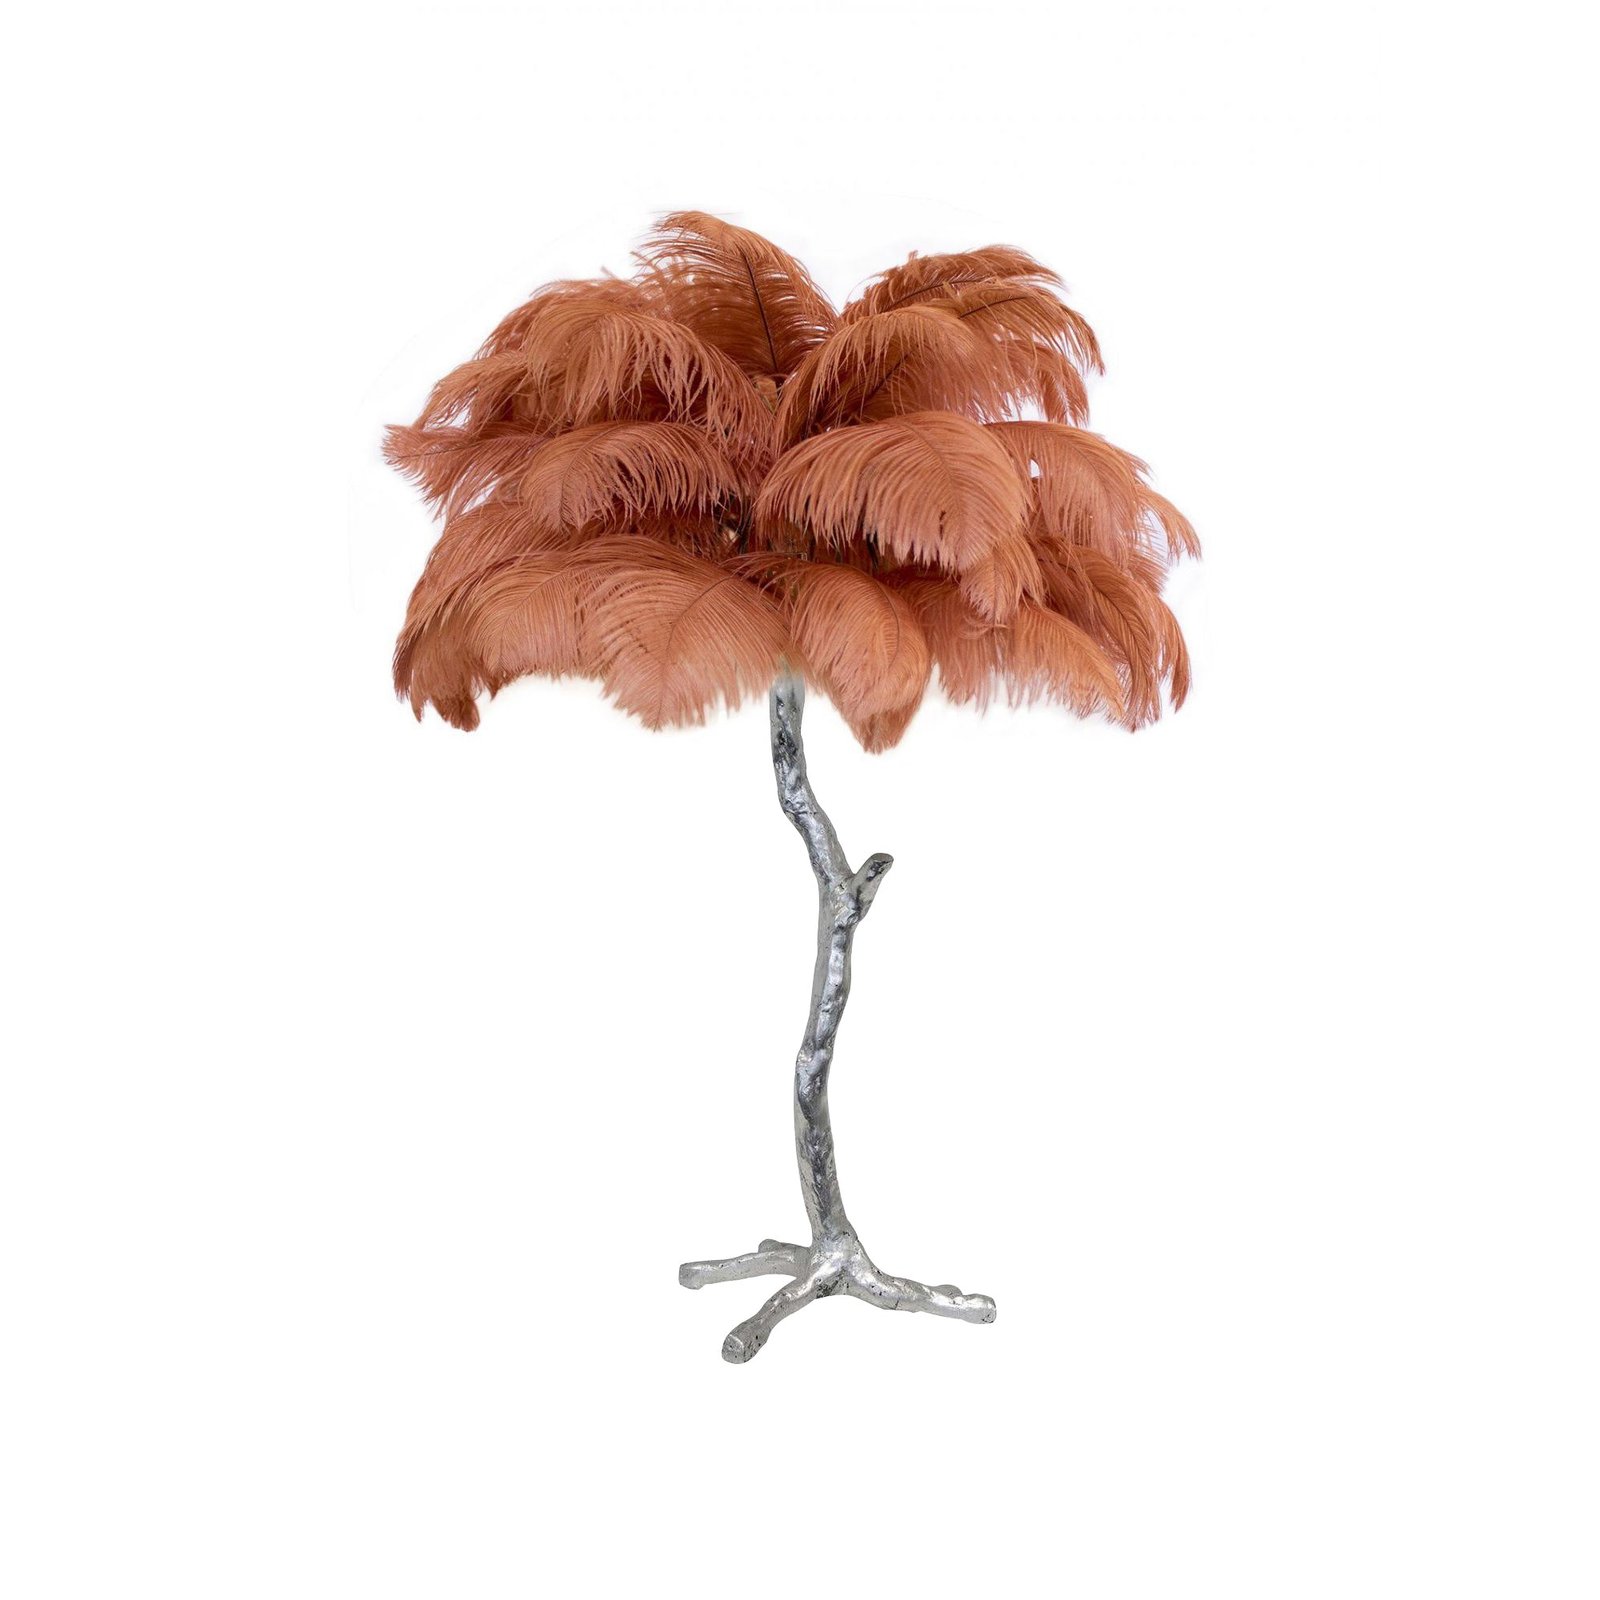 Silver Ostrich Feather Table Lamp in Mandarin Orange color, measuring 29.5" in diameter and height or 75cm in both dimensions.